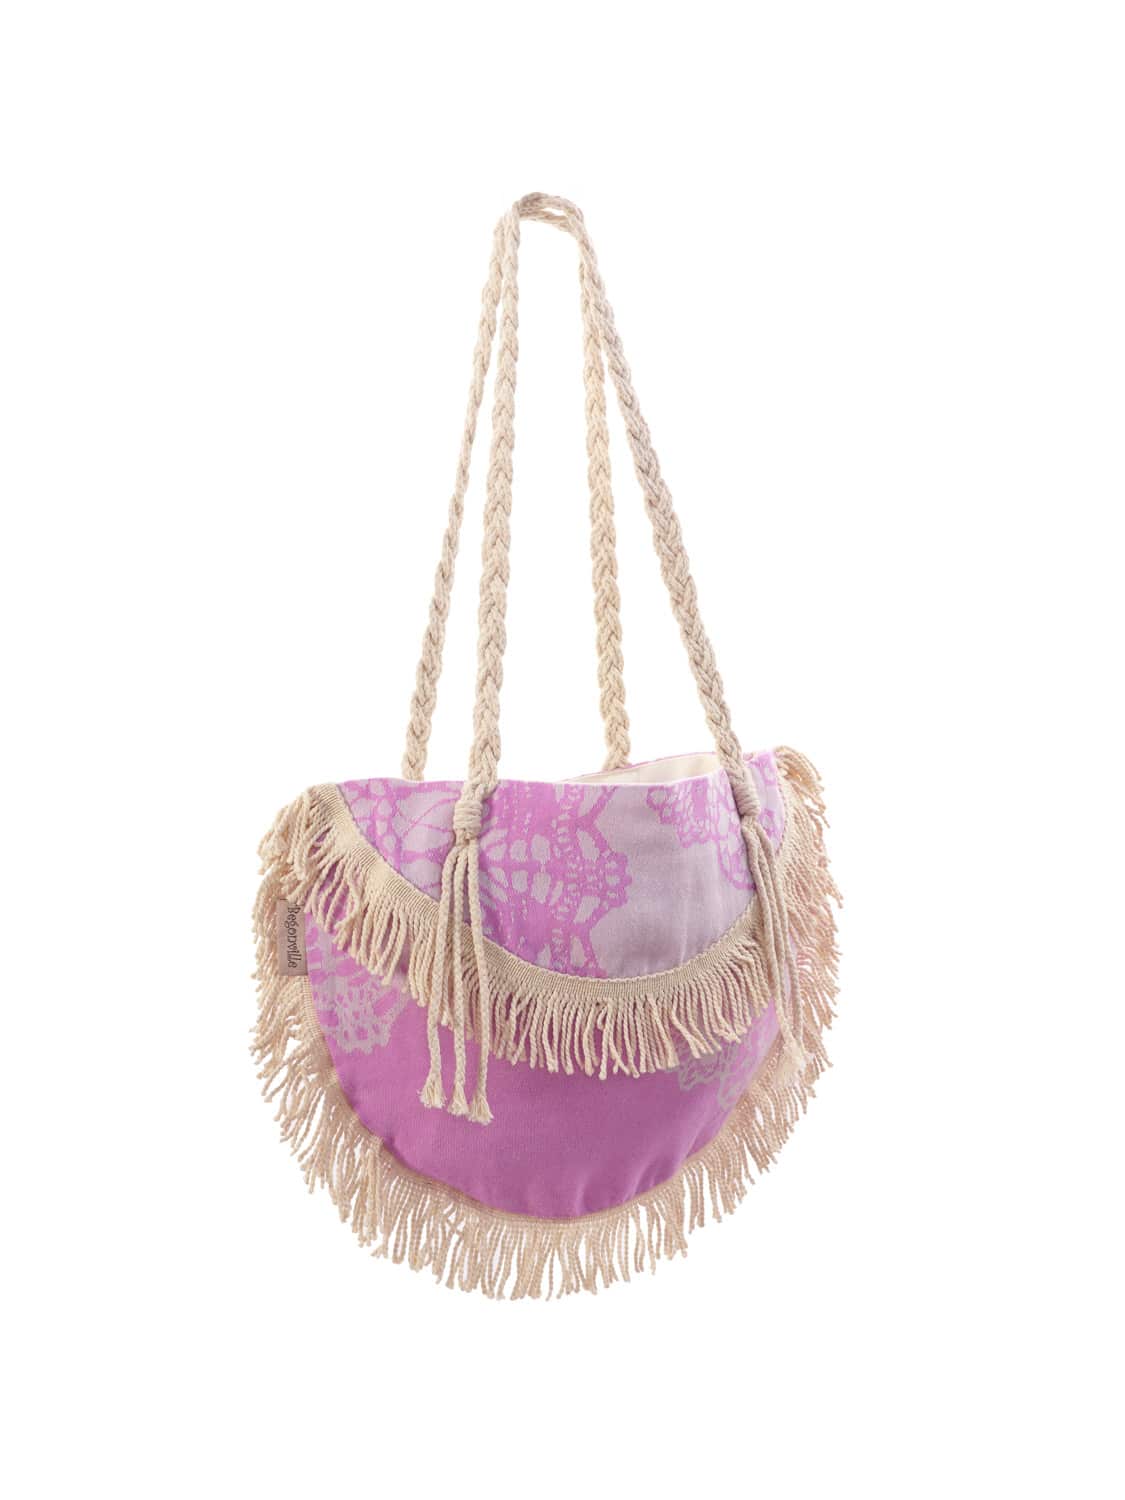 Lace Round Beach Bag - Pink